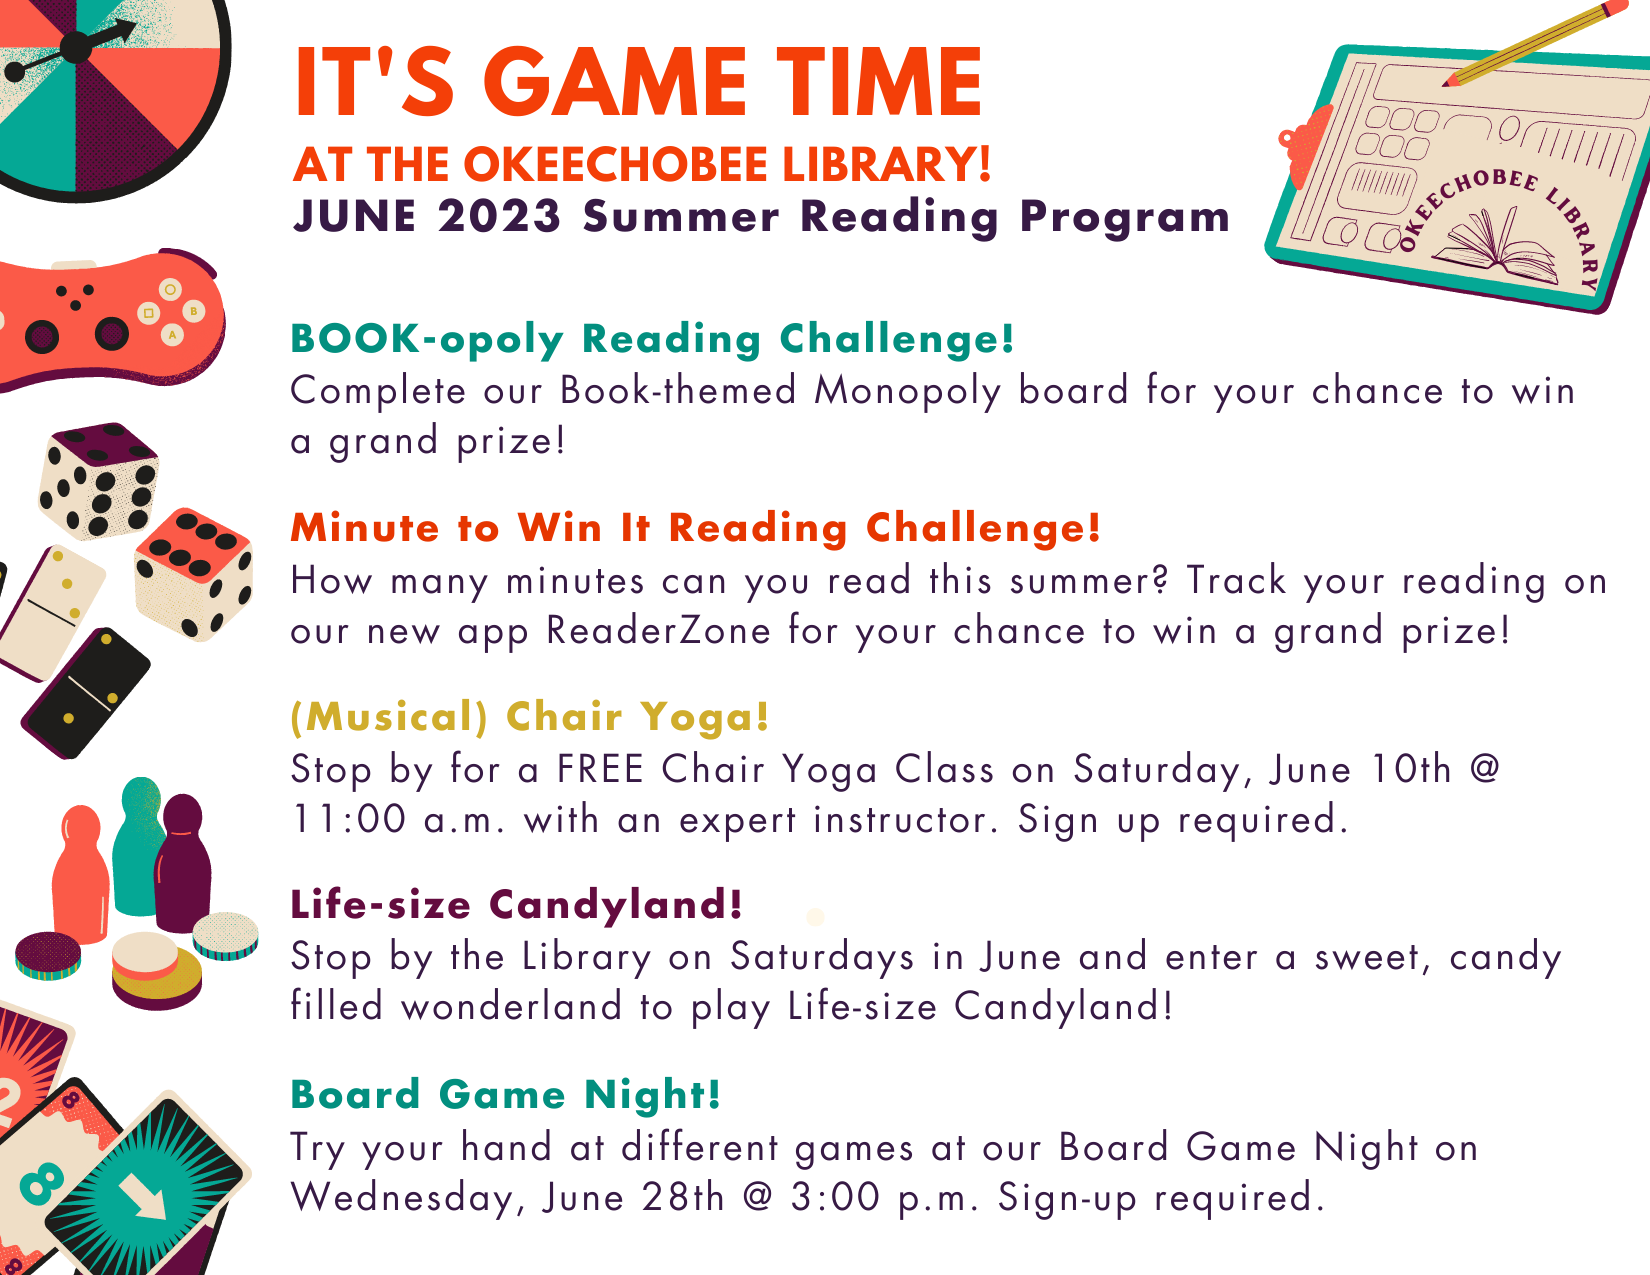 Stop by the Okeechobee Library beginning June 1st to participate in our annual Summer Reading Challenge as well as other game themed activities throughout the summer.